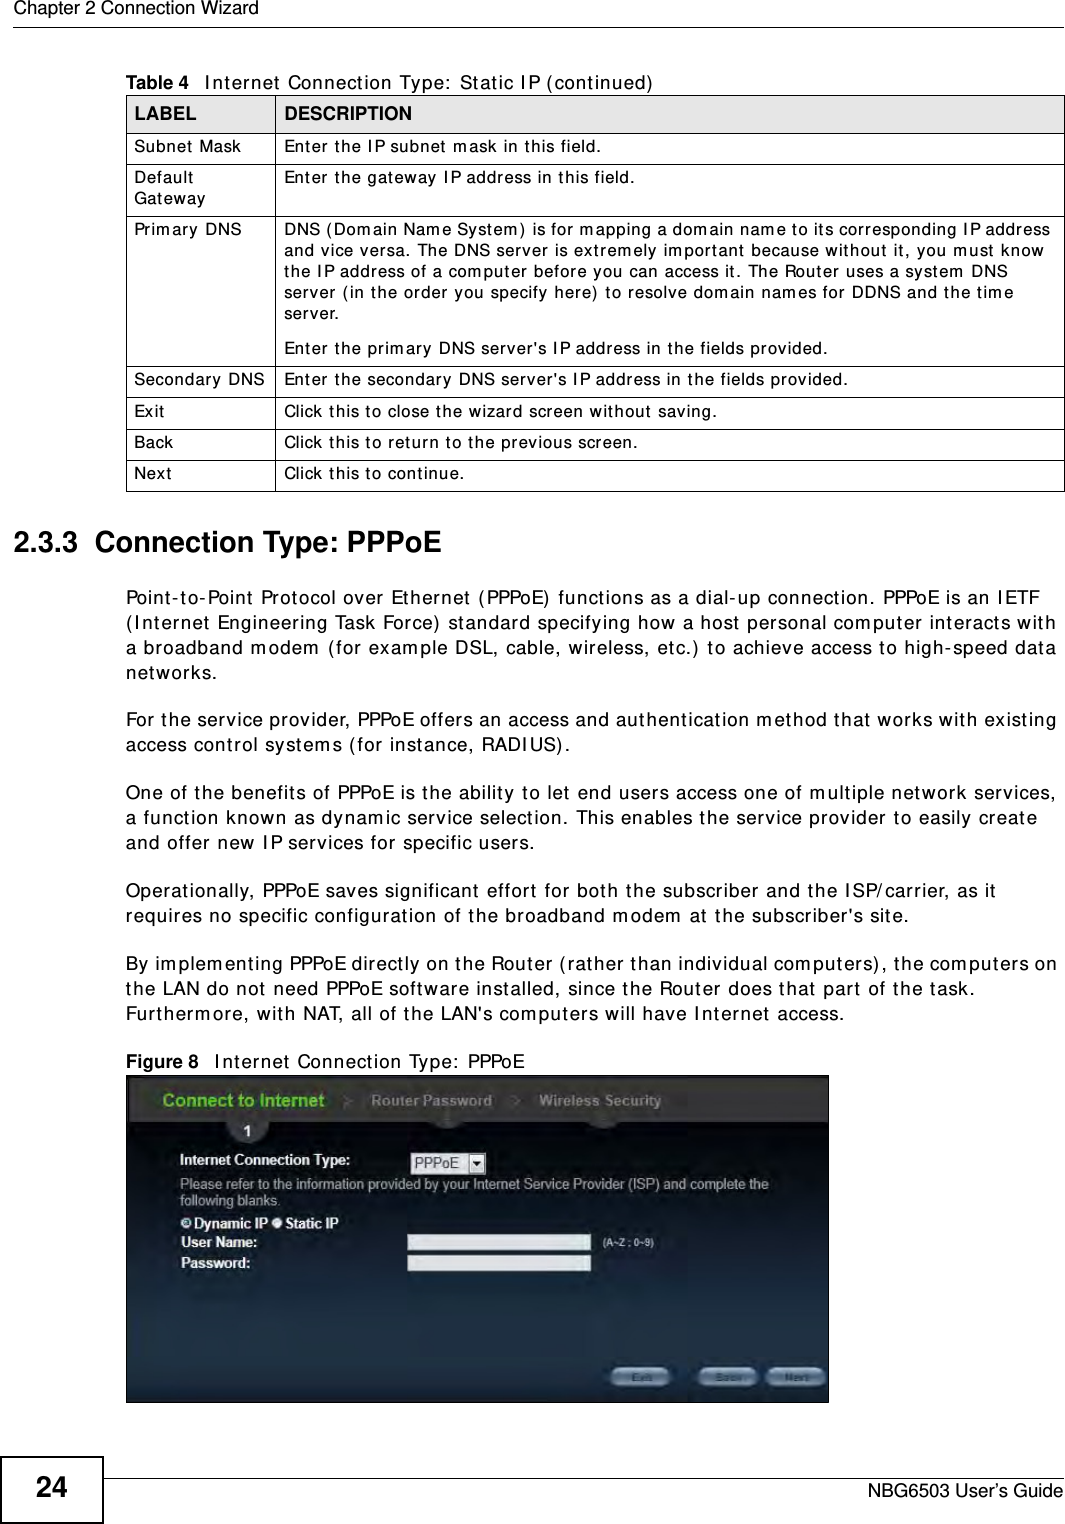 Chapter 2 Connection WizardNBG6503 User’s Guide242.3.3  Connection Type: PPPoEPoint-to-Point Protocol over Ethernet (PPPoE) functions as a dial-up connection. PPPoE is an IETF (Internet Engineering Task Force) standard specifying how a host personal computer interacts with a broadband modem (for example DSL, cable, wireless, etc.) to achieve access to high-speed data networks.For the service provider, PPPoE offers an access and authentication method that works with existing access control systems (for instance, RADIUS). One of the benefits of PPPoE is the ability to let end users access one of multiple network services, a function known as dynamic service selection. This enables the service provider to easily create and offer new IP services for specific users.Operationally, PPPoE saves significant effort for both the subscriber and the ISP/carrier, as it requires no specific configuration of the broadband modem at the subscriber&apos;s site.By implementing PPPoE directly on the Router (rather than individual computers), the computers on the LAN do not need PPPoE software installed, since the Router does that part of the task. Furthermore, with NAT, all of the LAN&apos;s computers will have Internet access.Figure 8   Internet Connection Type: PPPoE Subnet Mask Enter the IP subnet mask in this field.Default Gateway Enter the gateway IP address in this field.Primary DNS DNS (Domain Name System) is for mapping a domain name to its corresponding IP address and vice versa. The DNS server is extremely important because without it, you must know the IP address of a computer before you can access it. The Router uses a system DNS server (in the order you specify here) to resolve domain names for DDNS and the time server.Enter the primary DNS server&apos;s IP address in the fields provided.Secondary DNS Enter the secondary DNS server&apos;s IP address in the fields provided.Exit Click this to close the wizard screen without saving.Back Click this to return to the previous screen.Next Click this to continue. Table 4   Internet Connection Type: Static IP (continued)LABEL DESCRIPTION